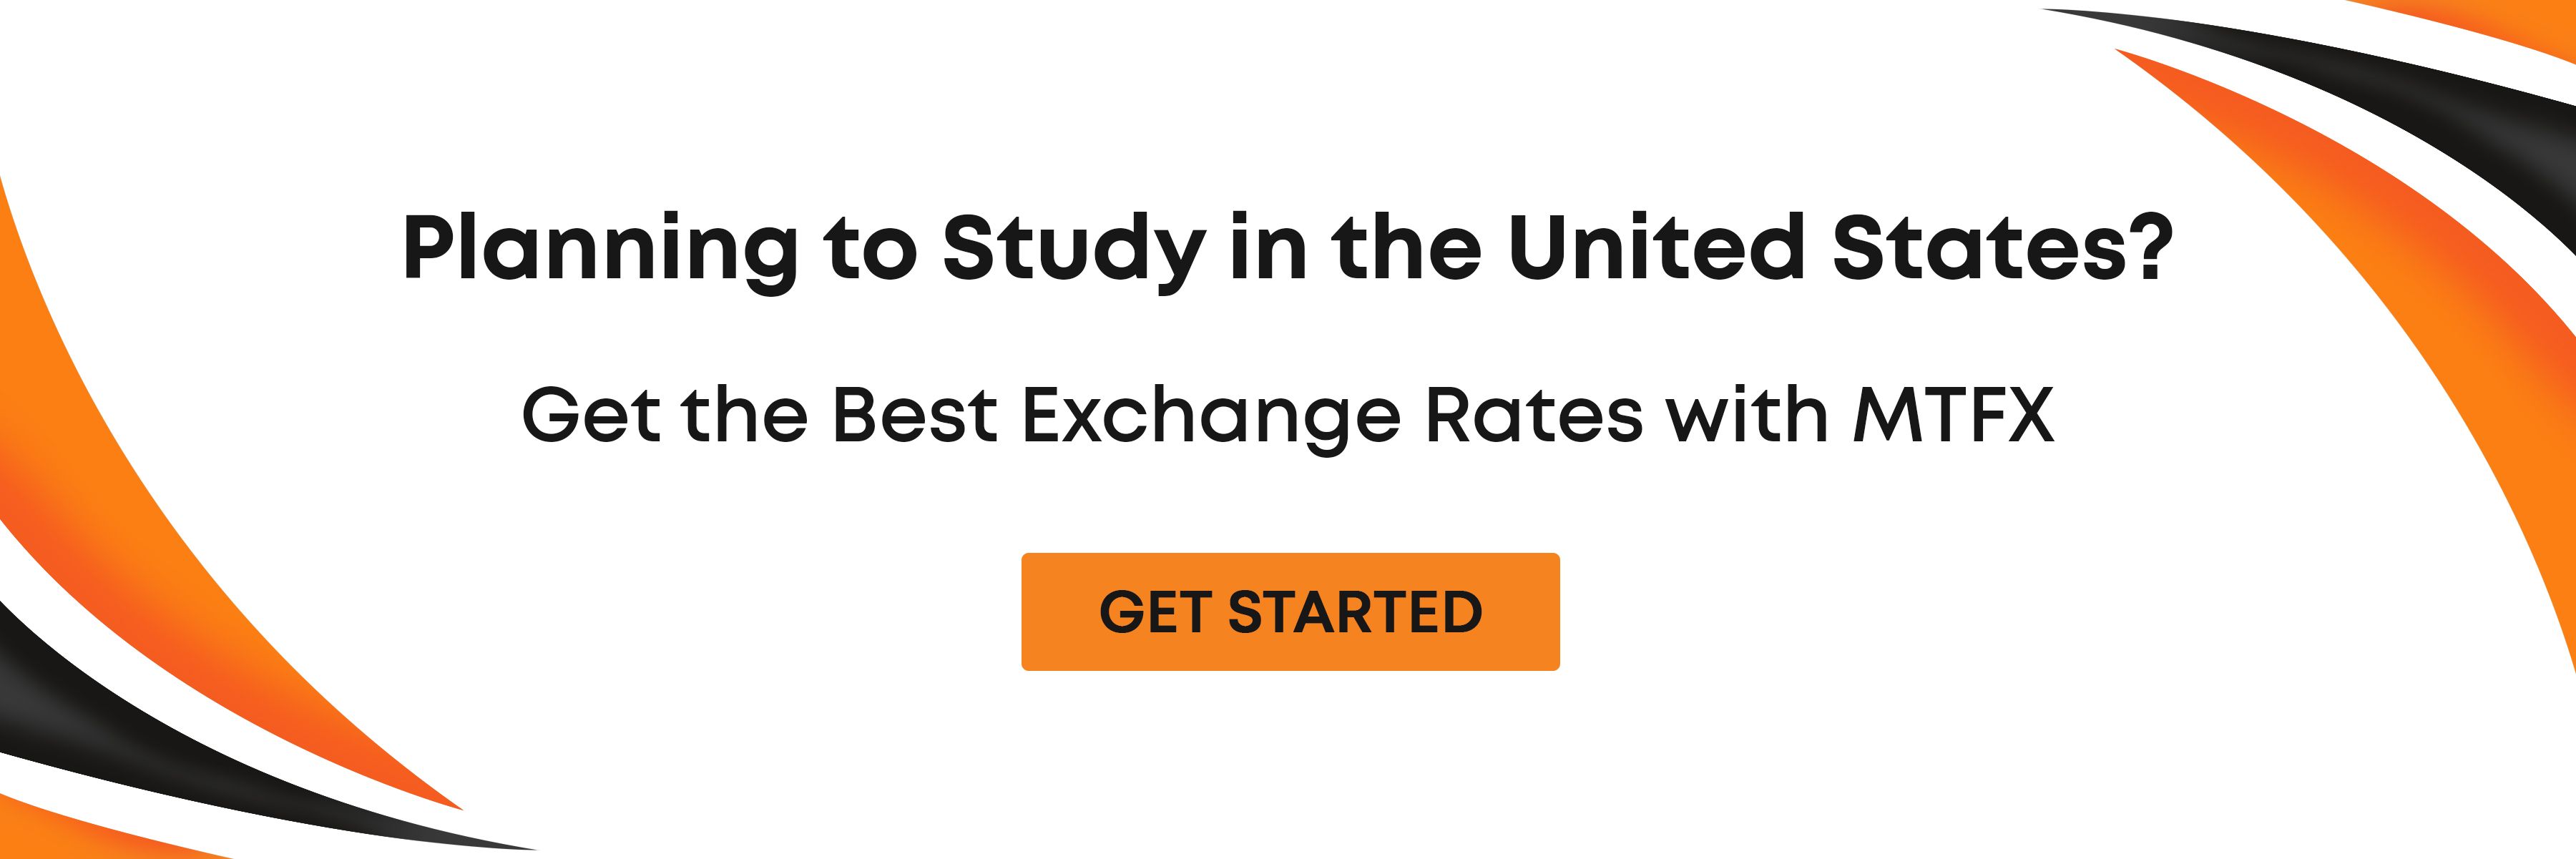 Planning to study in the United States?